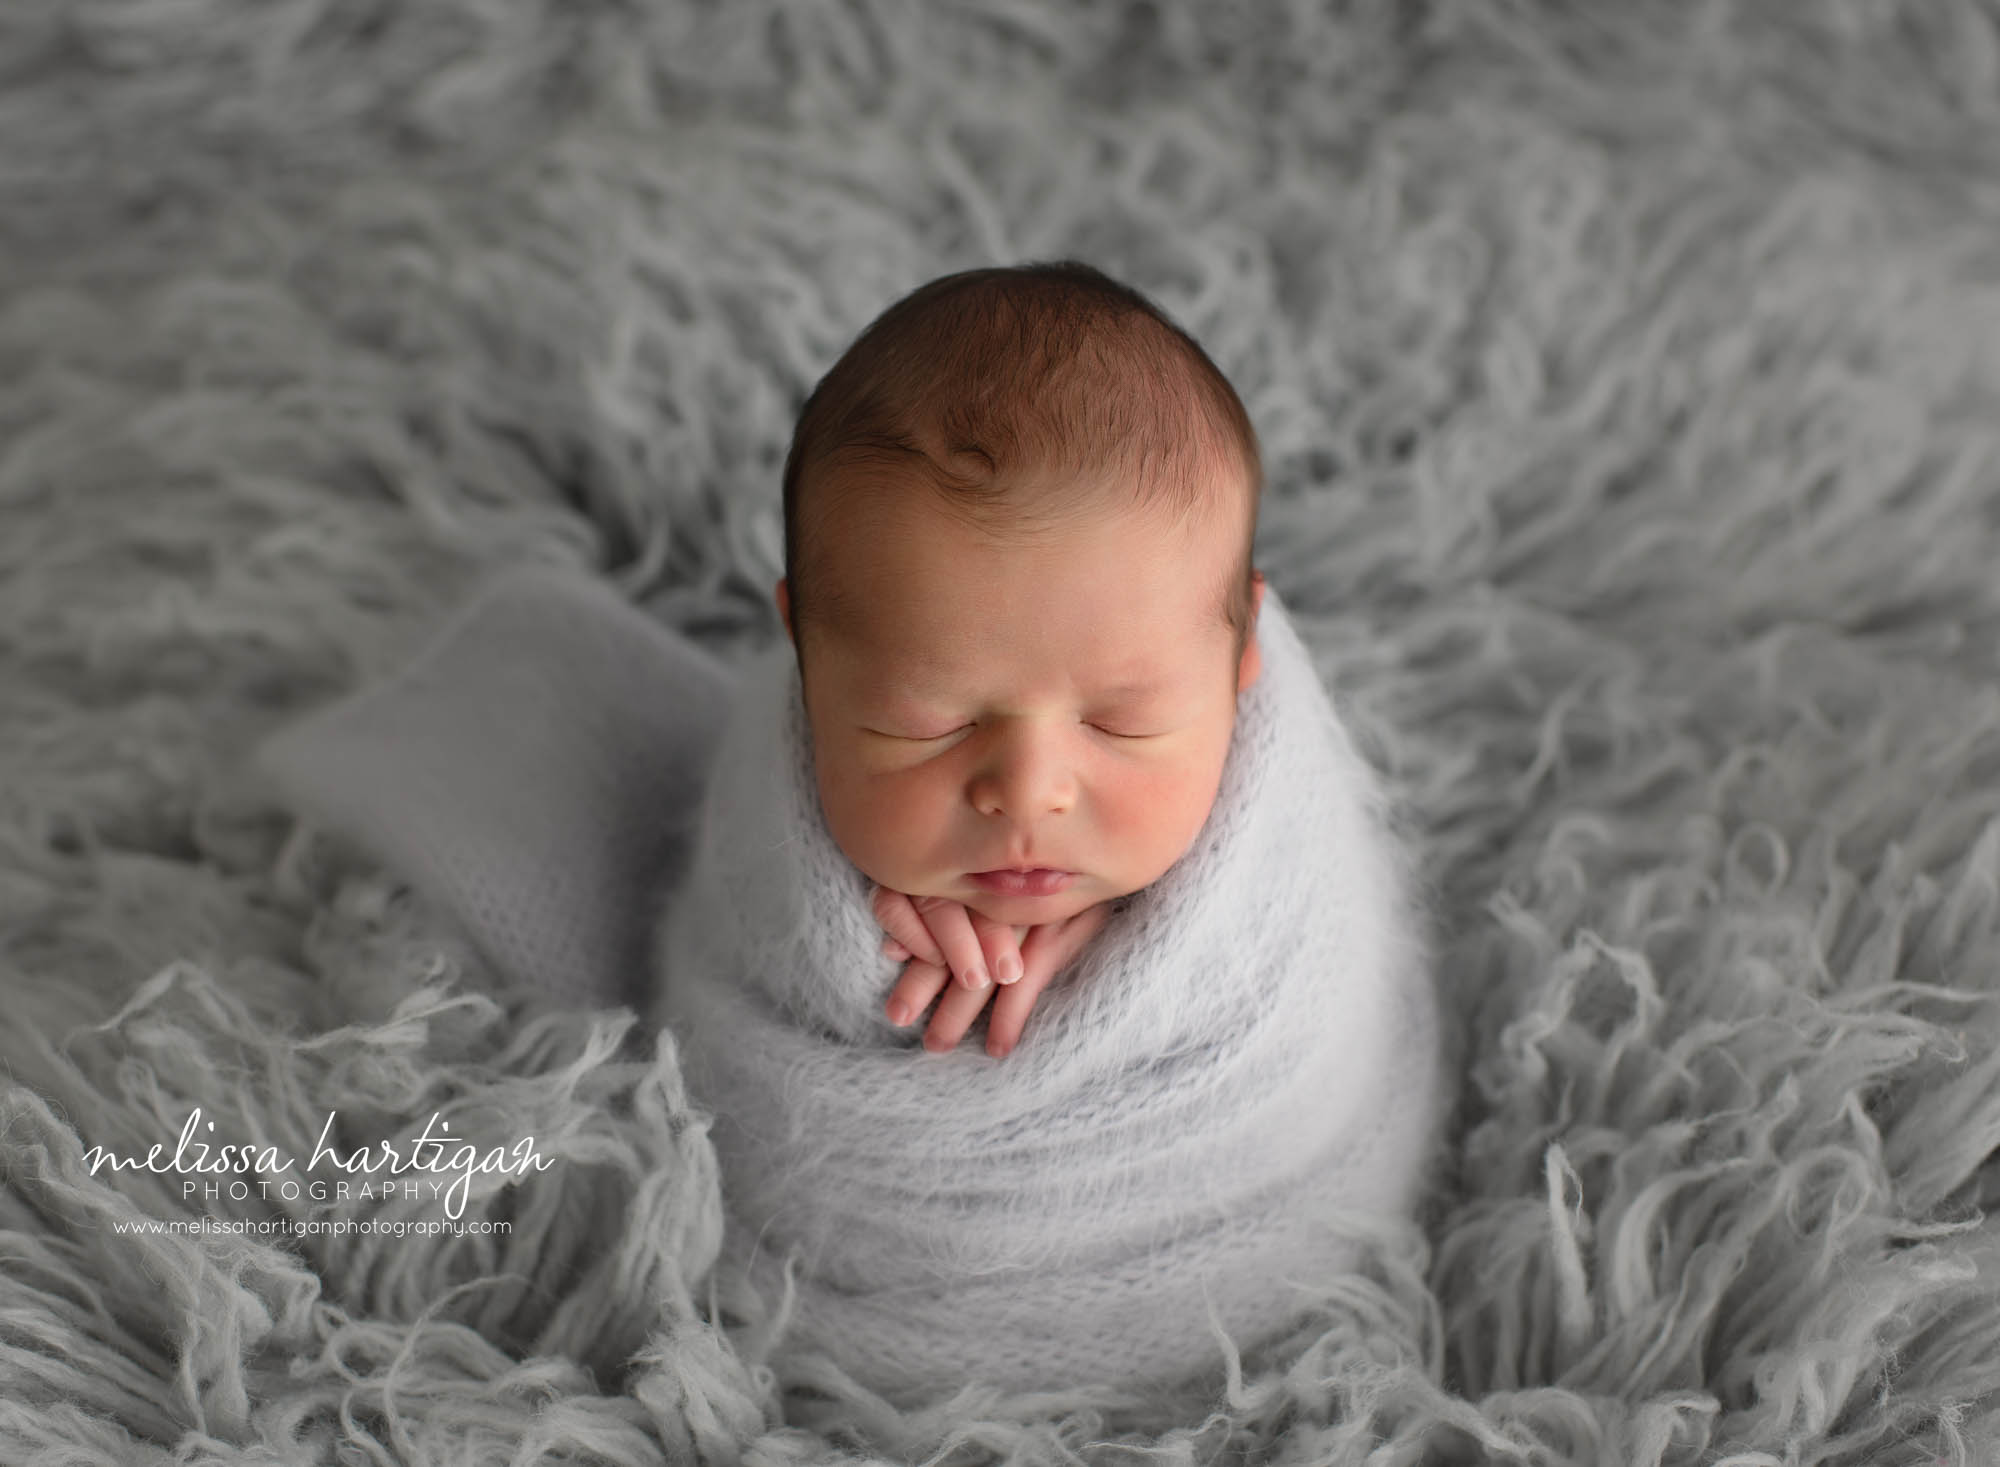 newborn baby boy wrapped in gray knitted wrap posed on gray flokati CT newborn photography